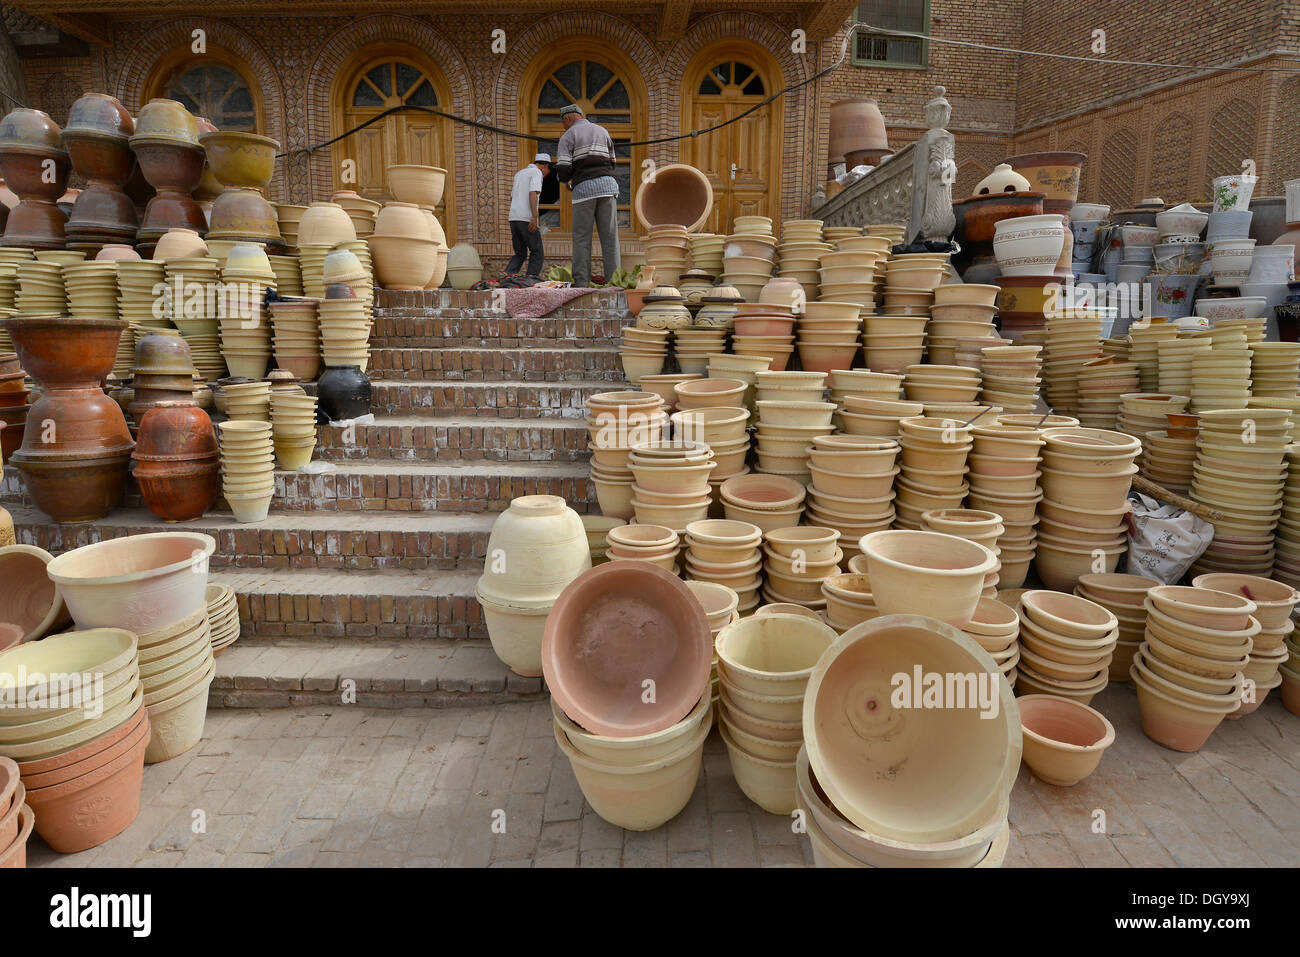 Kashgar crafts, Muslim Uighurs are offering their pottery and ceramics in front of an Uighur mud-brick house on the Kashgar Stock Photo